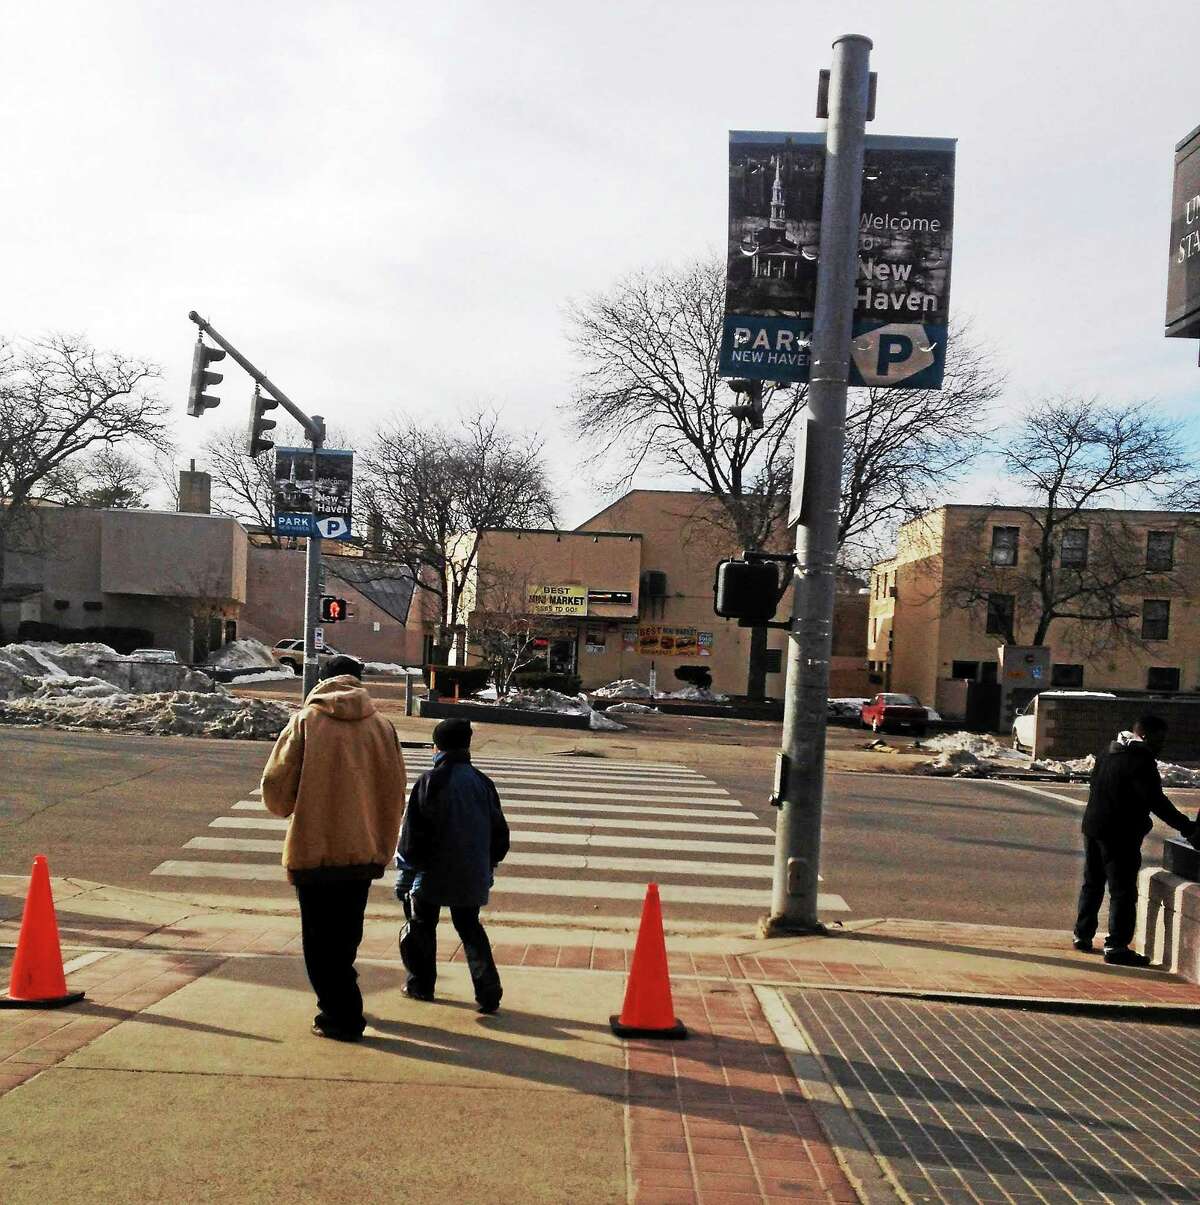 The crosswalk in front of Union Station in New Haven.